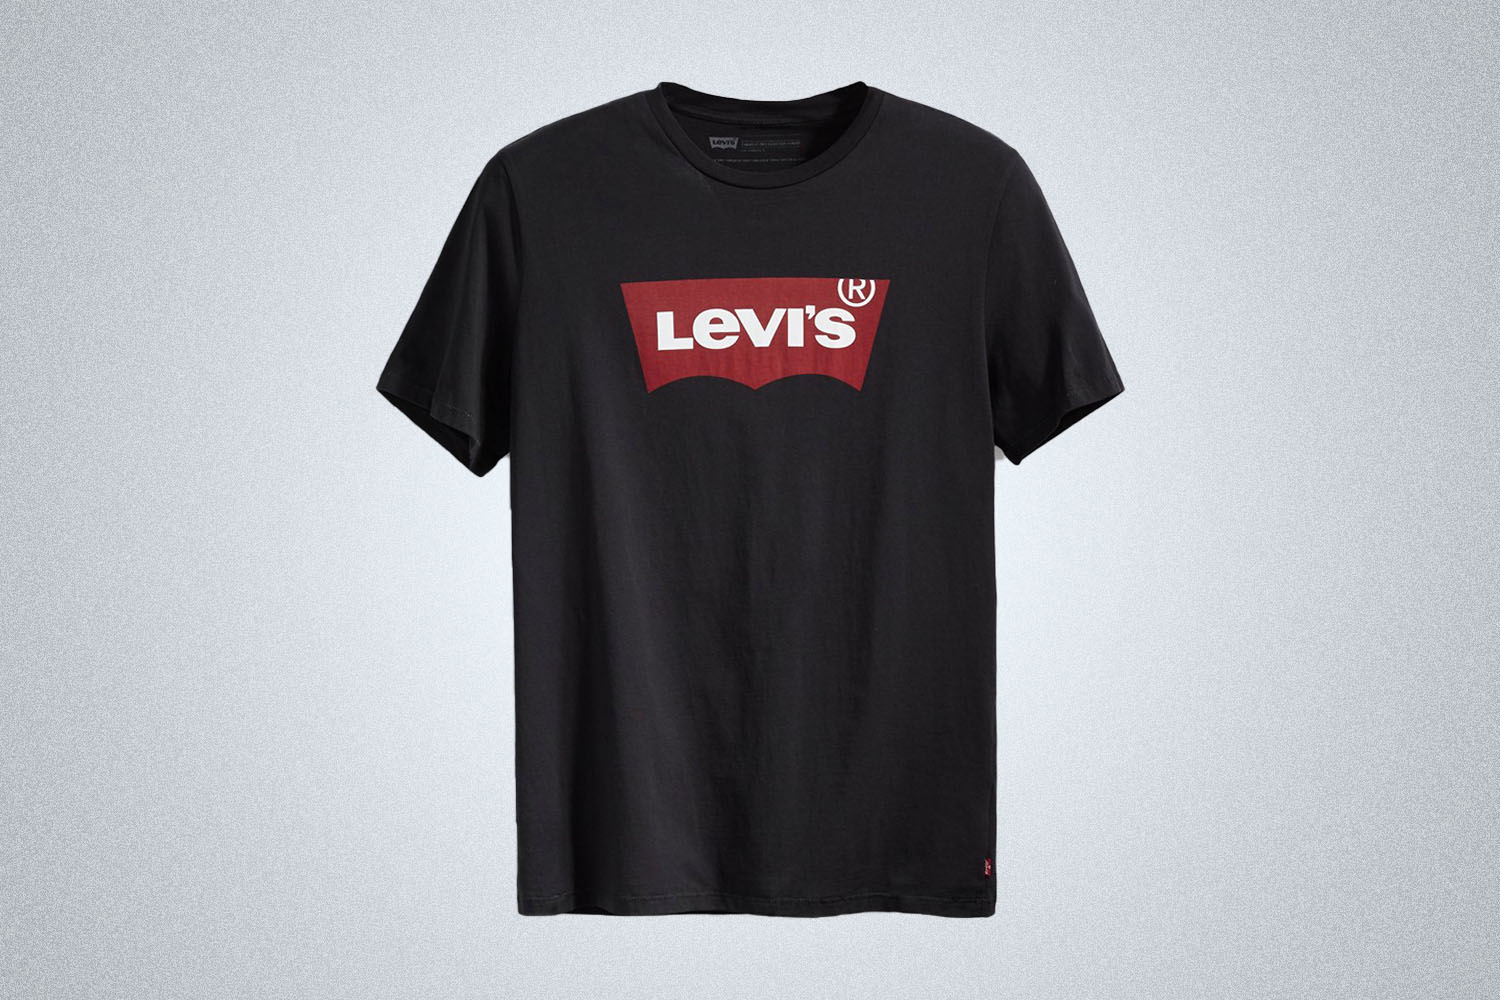 A black tee with a Levi's logo on a grey background